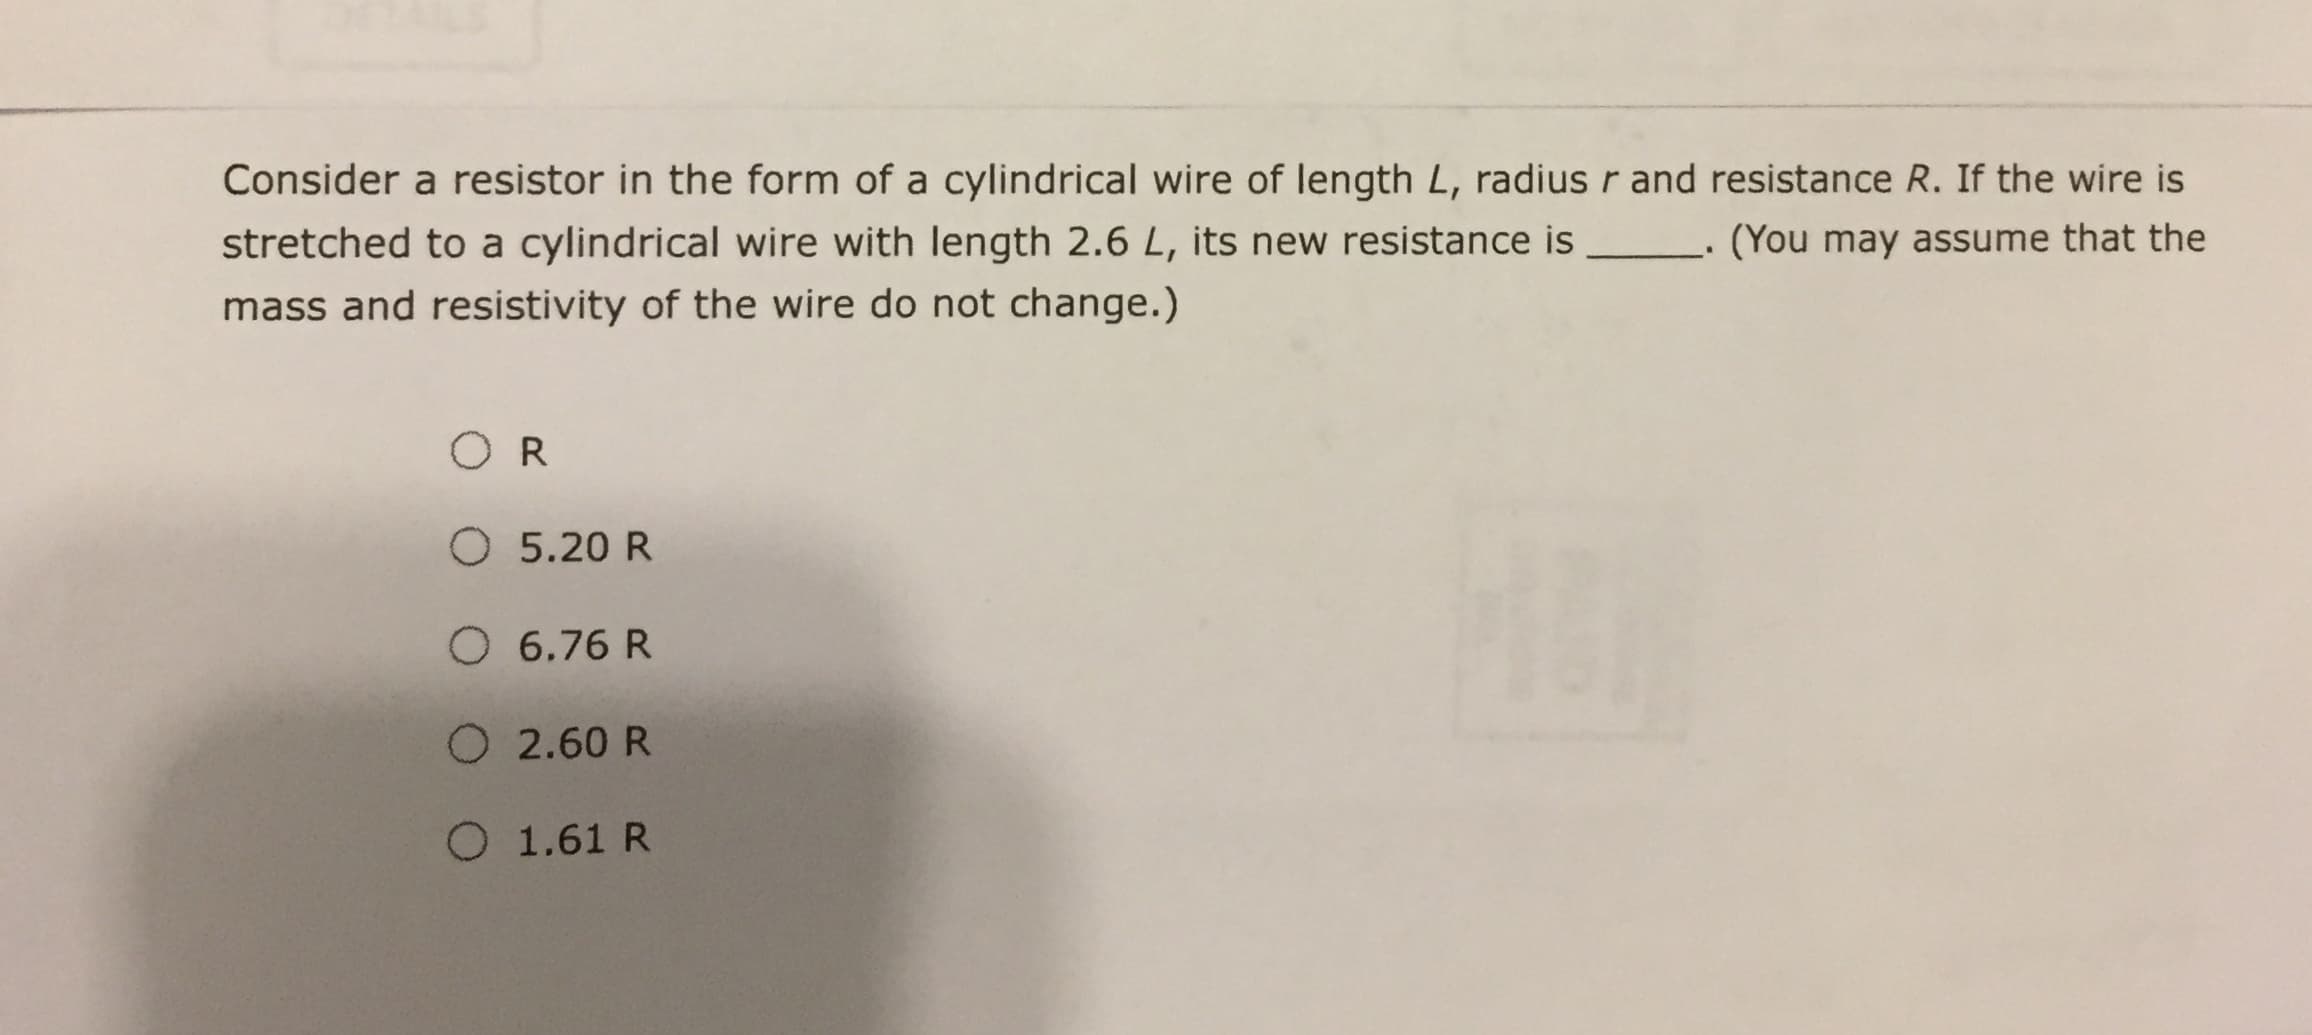 Consider a resistor in the form of a cylindrical wire of length L, radius r and resistance R. If the wire is
stretched to a cylindrical wire with length 2.6 L, its new resistance is
(You may assume that the
mass and resistivity of the wire do not change.)
OR
O 5.20 R
O 6.76 R
O 2.60 R
O 1.61 R
